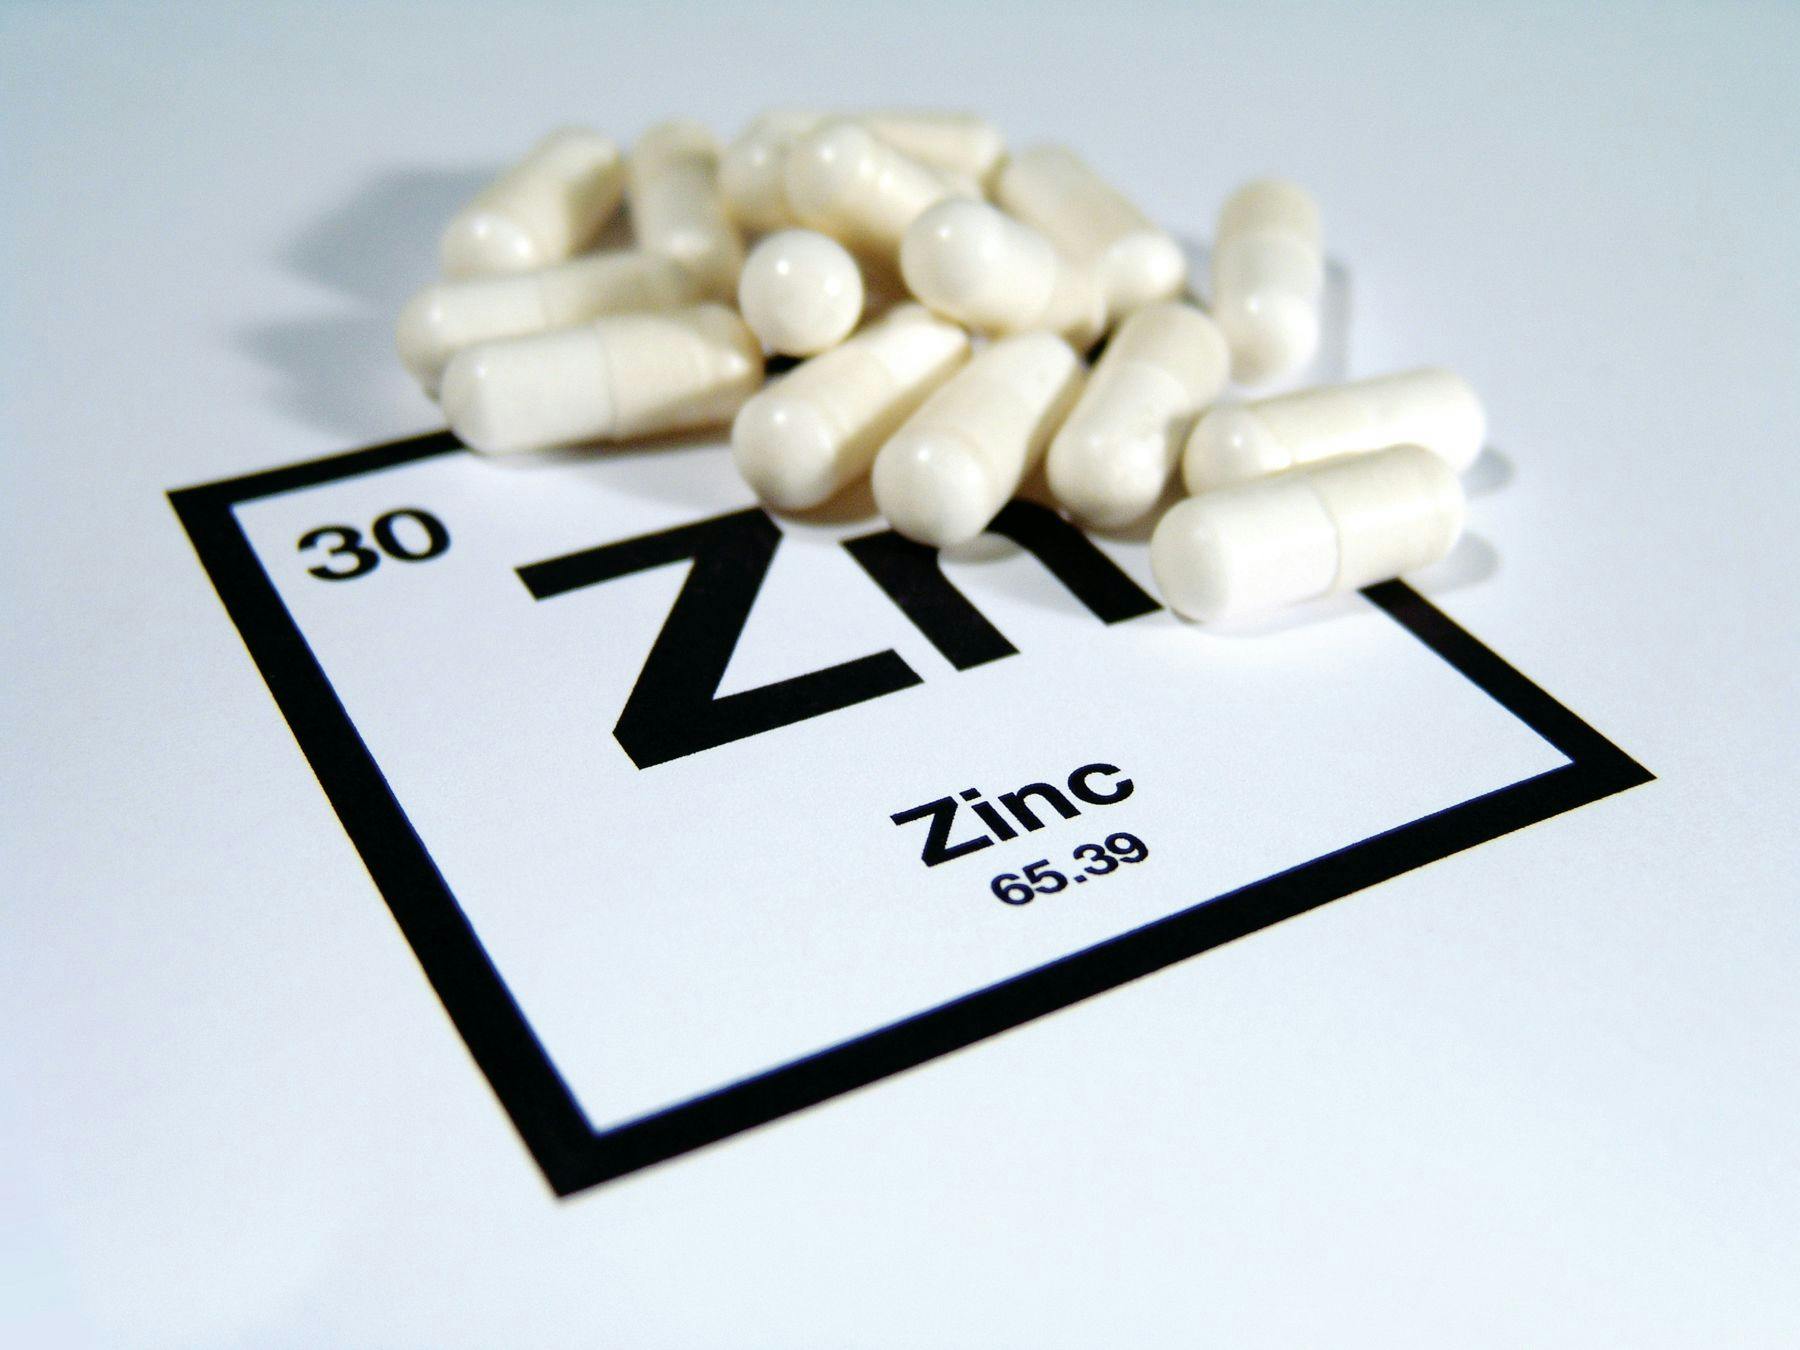 2016 Ingredient Trends to Watch for Food, Drinks, and Dietary Supplements: Zinc